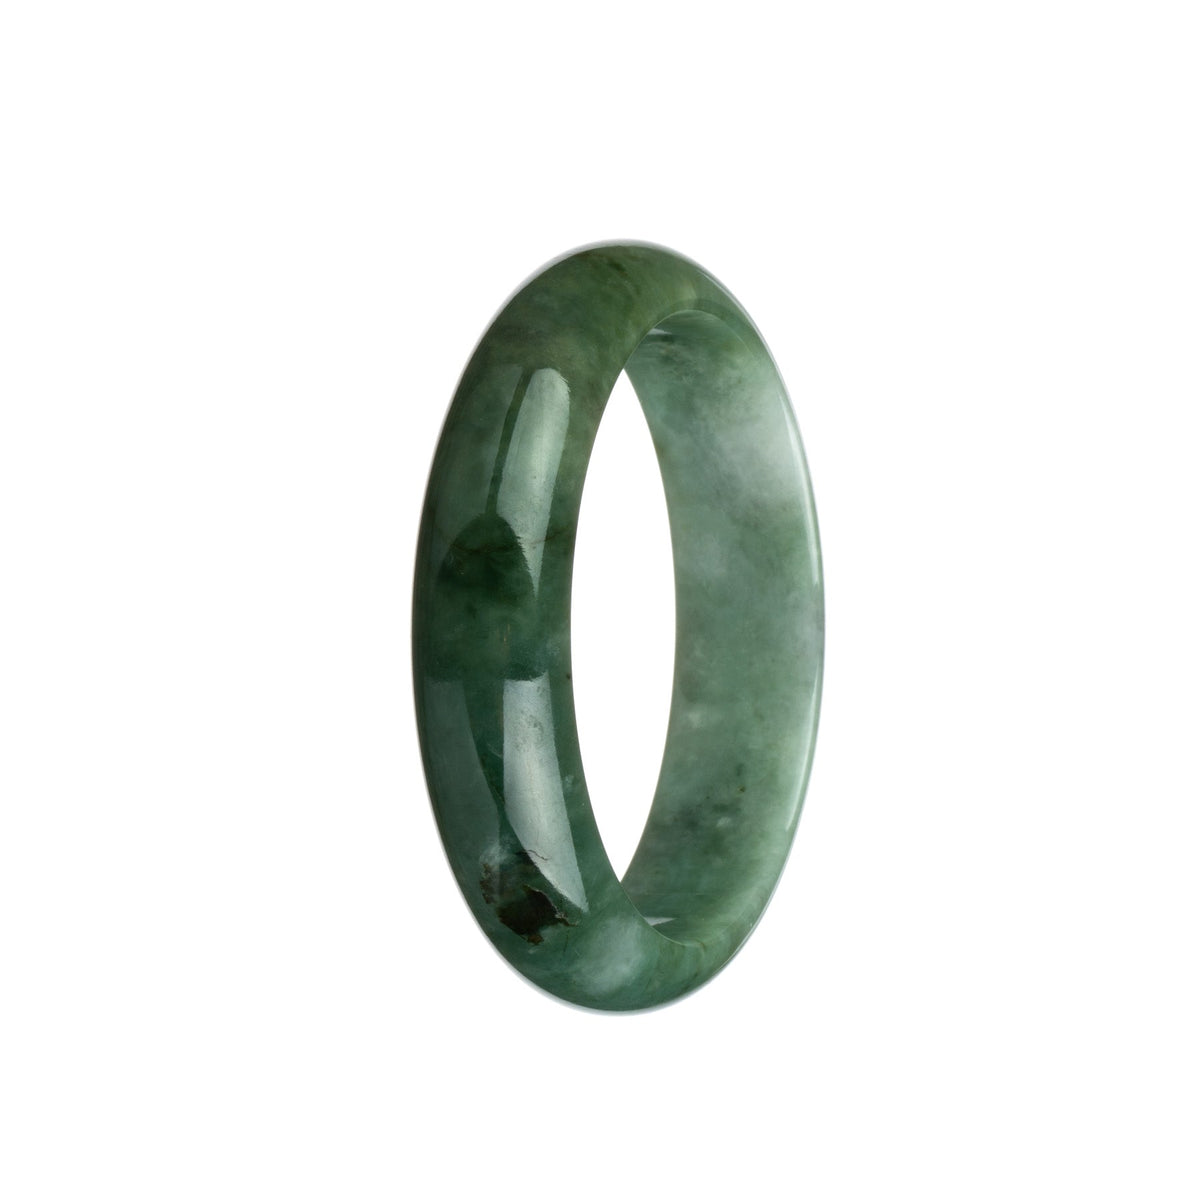 A high-quality green jade bangle with a beautiful pattern, in a half-moon shape, measuring 58mm. Perfect for adding elegance and sophistication to any outfit.